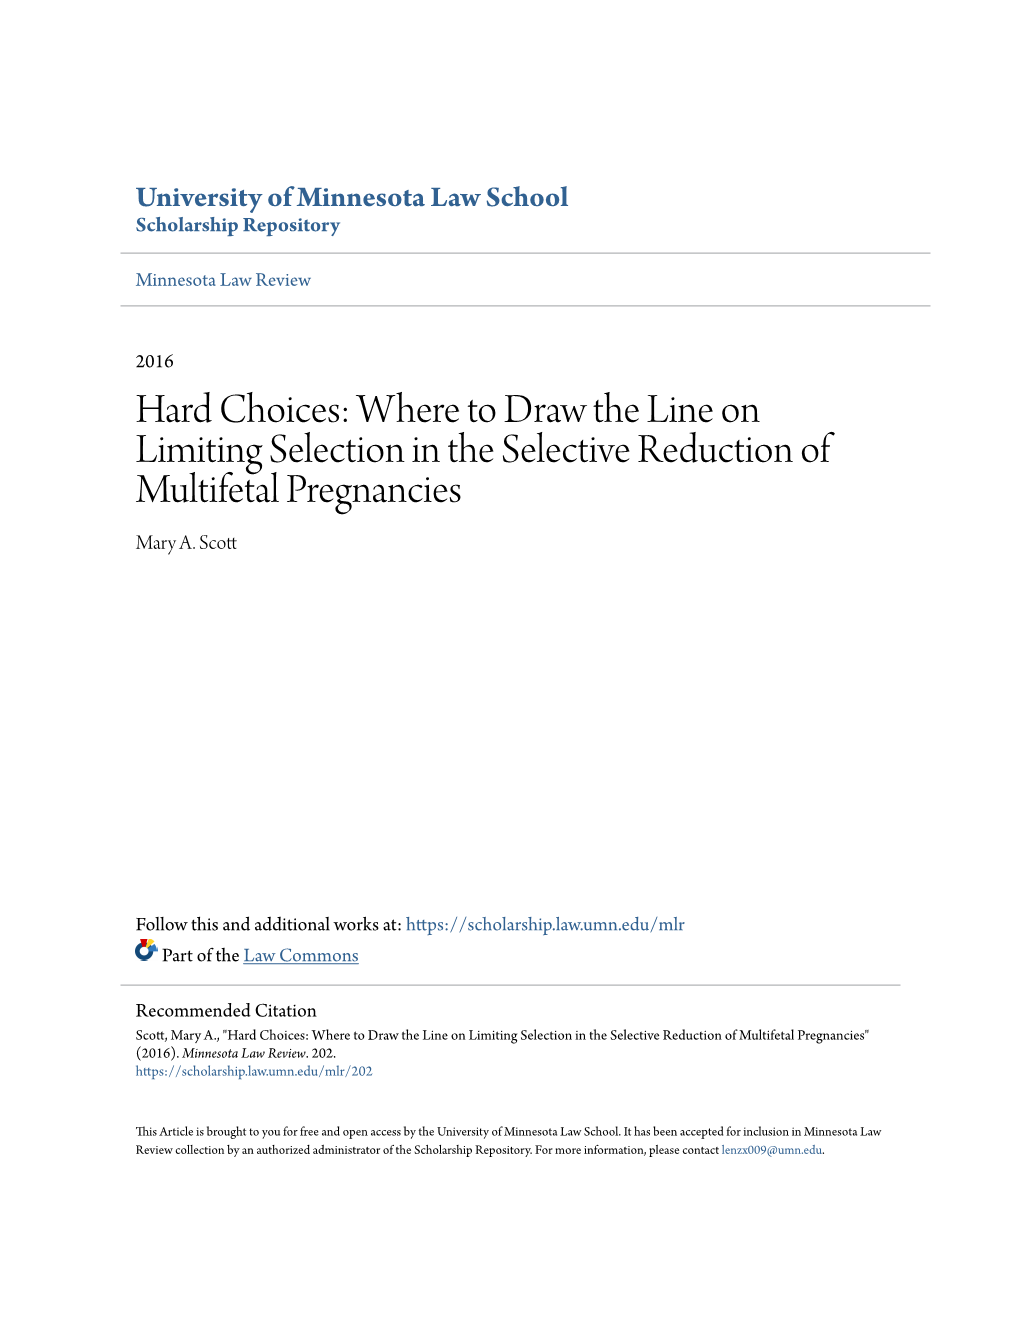 Hard Choices: Where to Draw the Line on Limiting Selection in the Selective Reduction of Multifetal Pregnancies Mary A